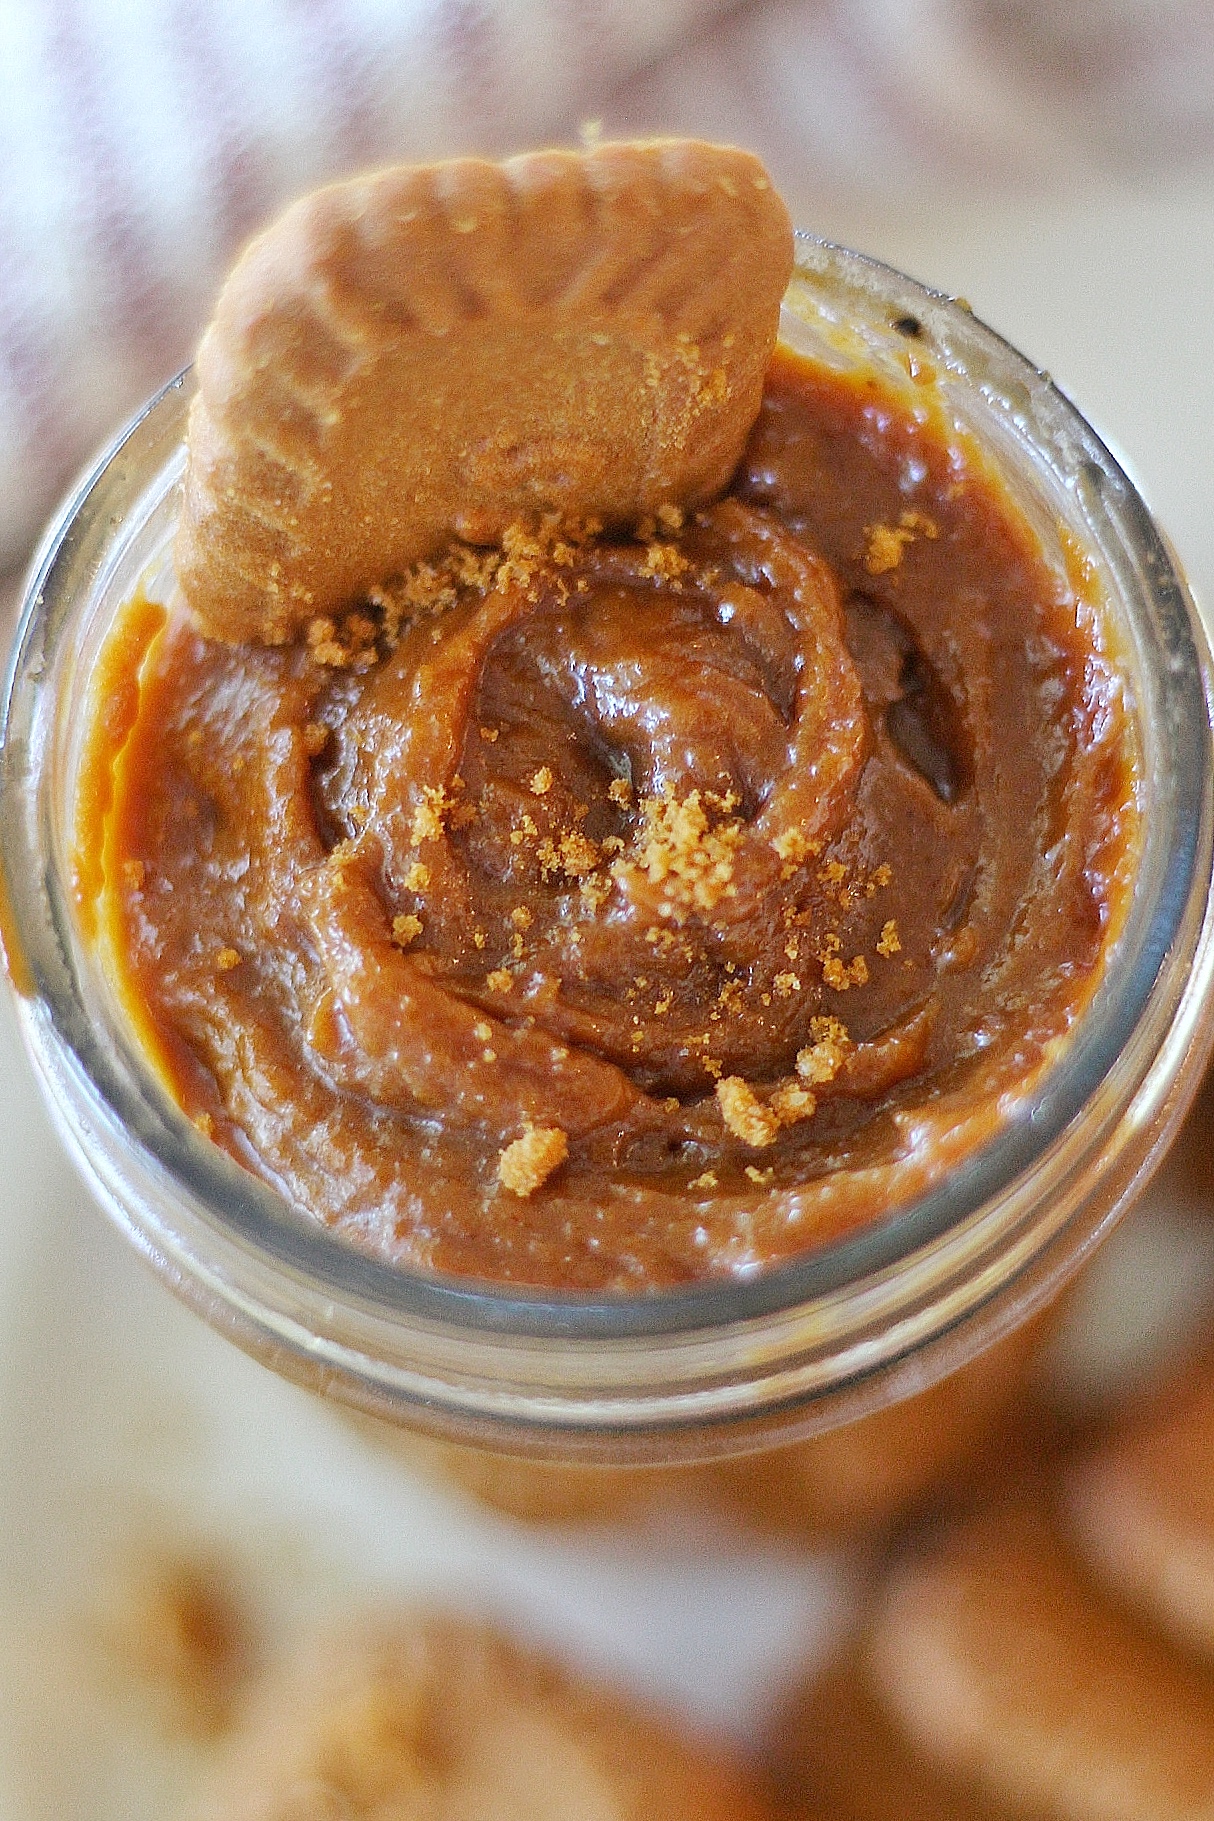 Homemade Speculoos Cookie Butter - #biscoff #cookiebutter #homemadecookiebutterrecipe #cookiebutterrecipe #fruitdip